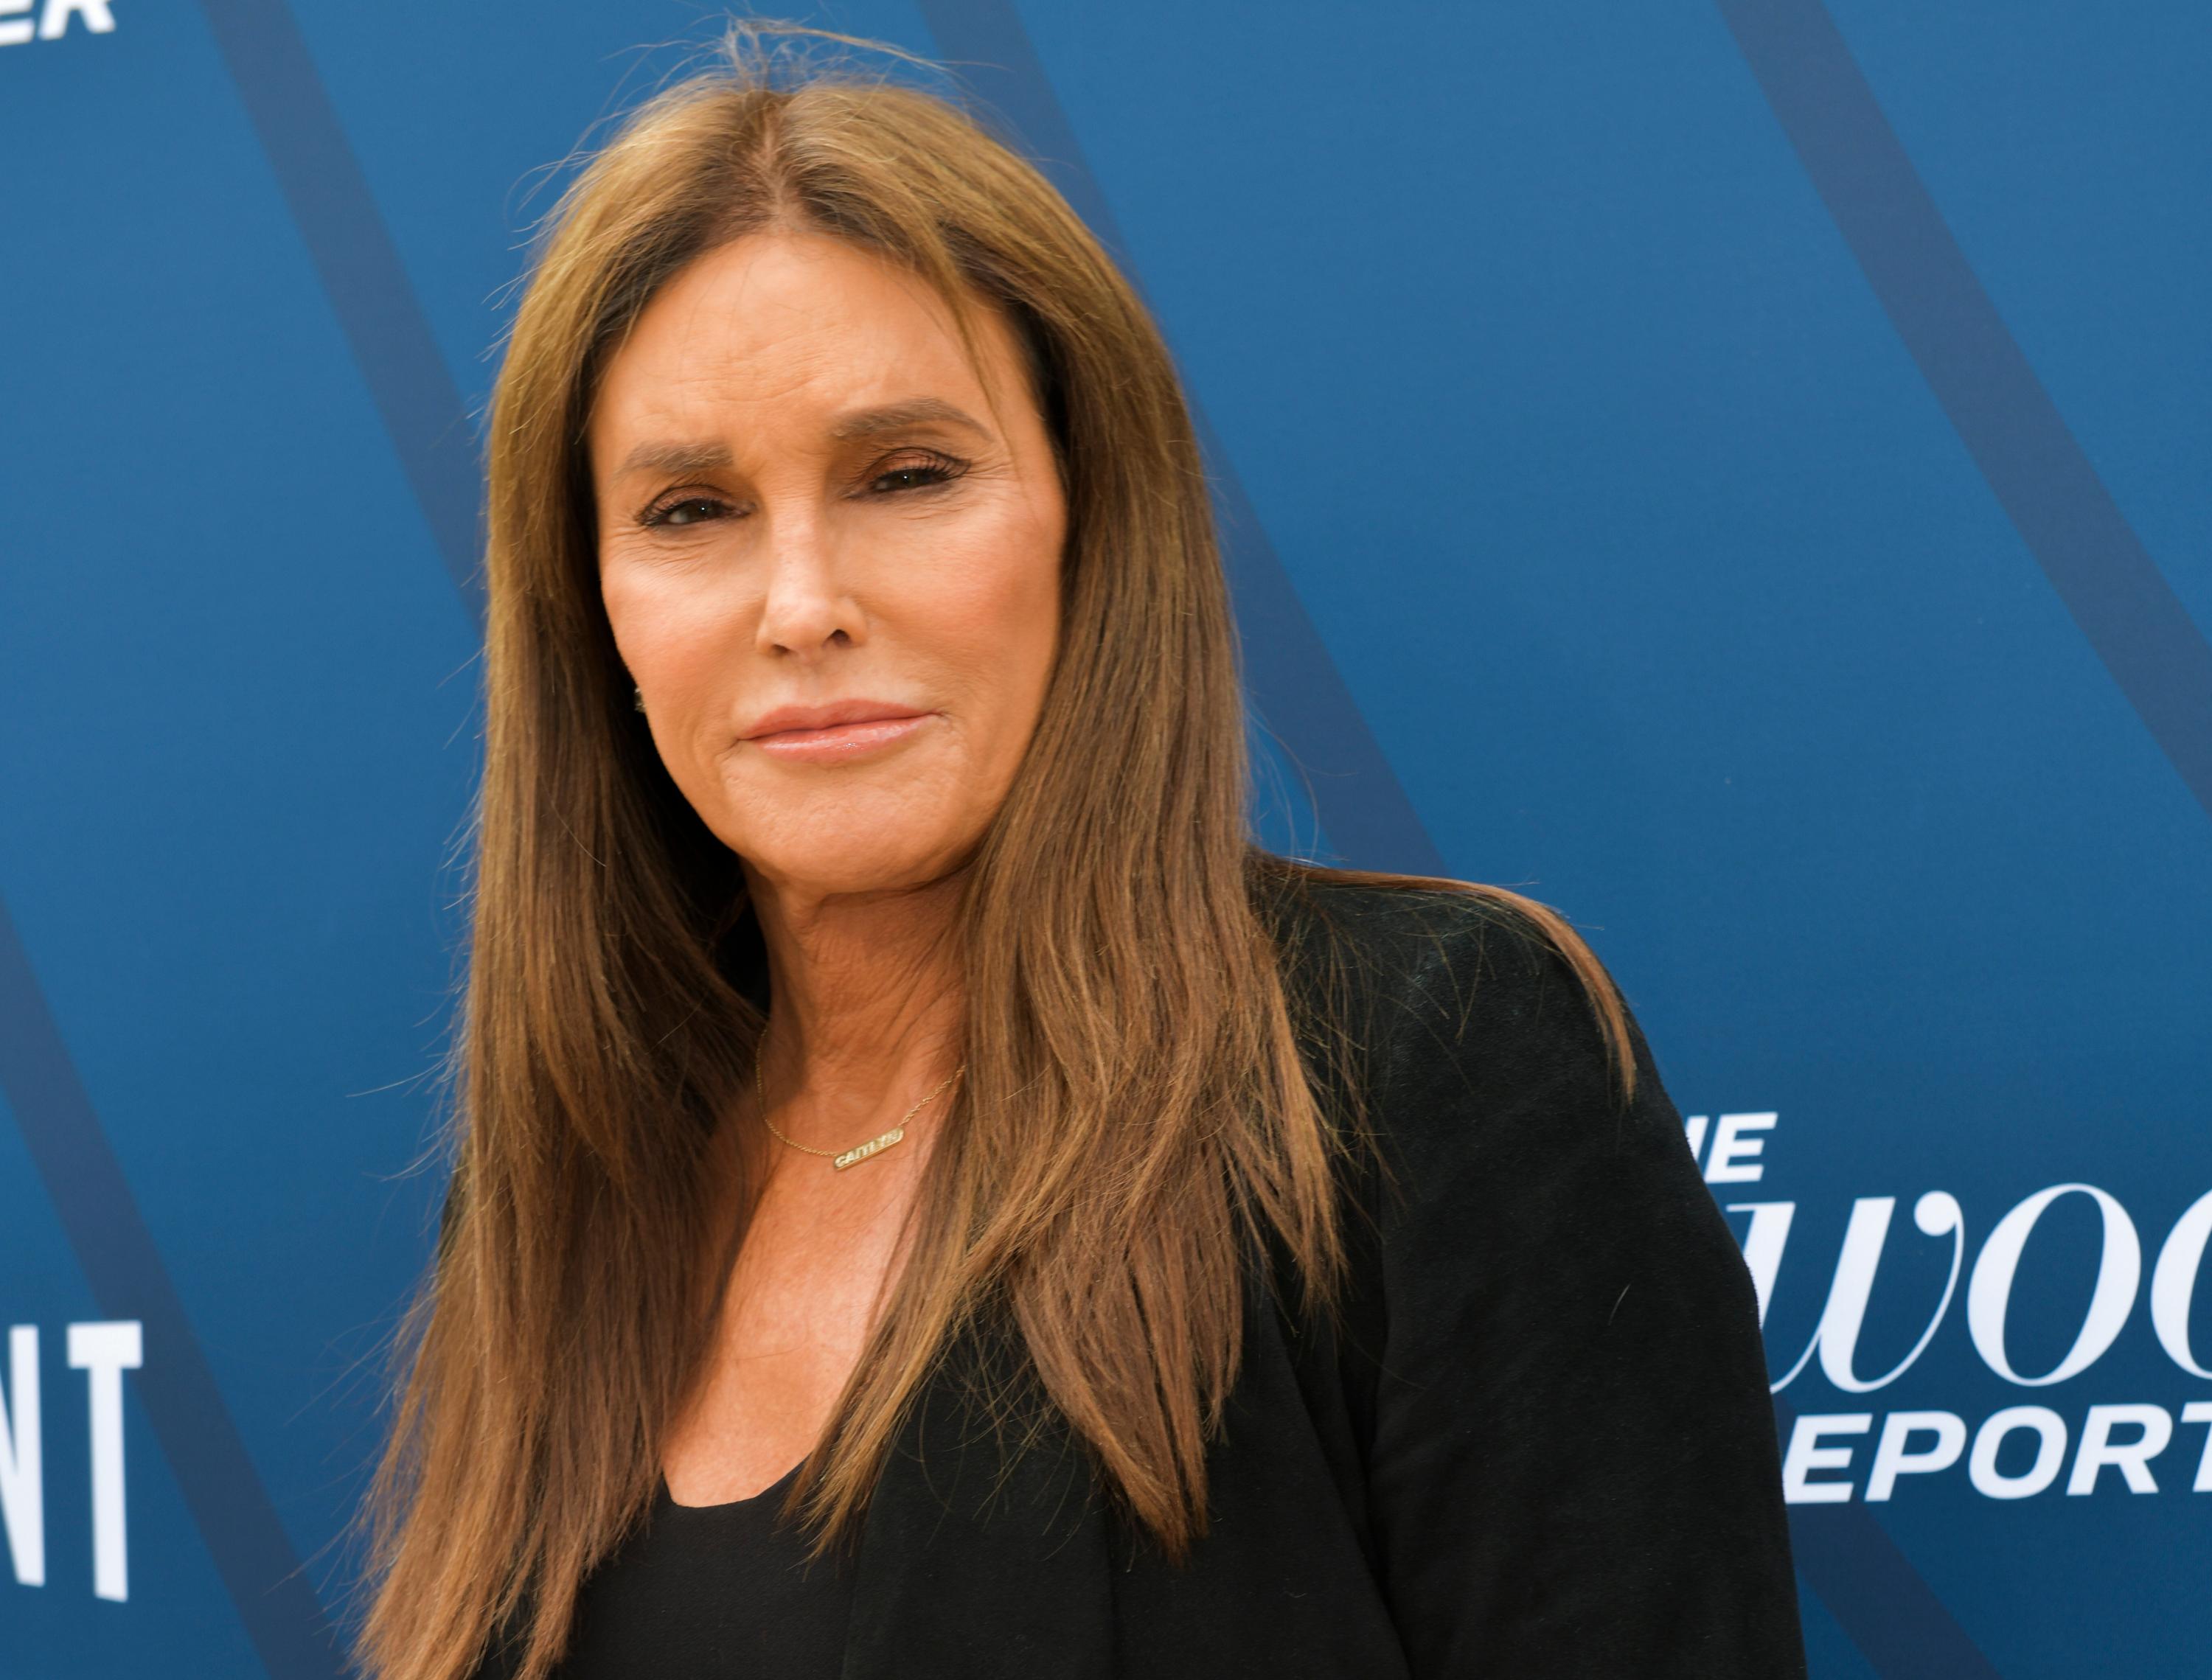 Caitlyn Jenner Apologized To Her Kids After The ‘I Am A Celebrity’ Mix Up